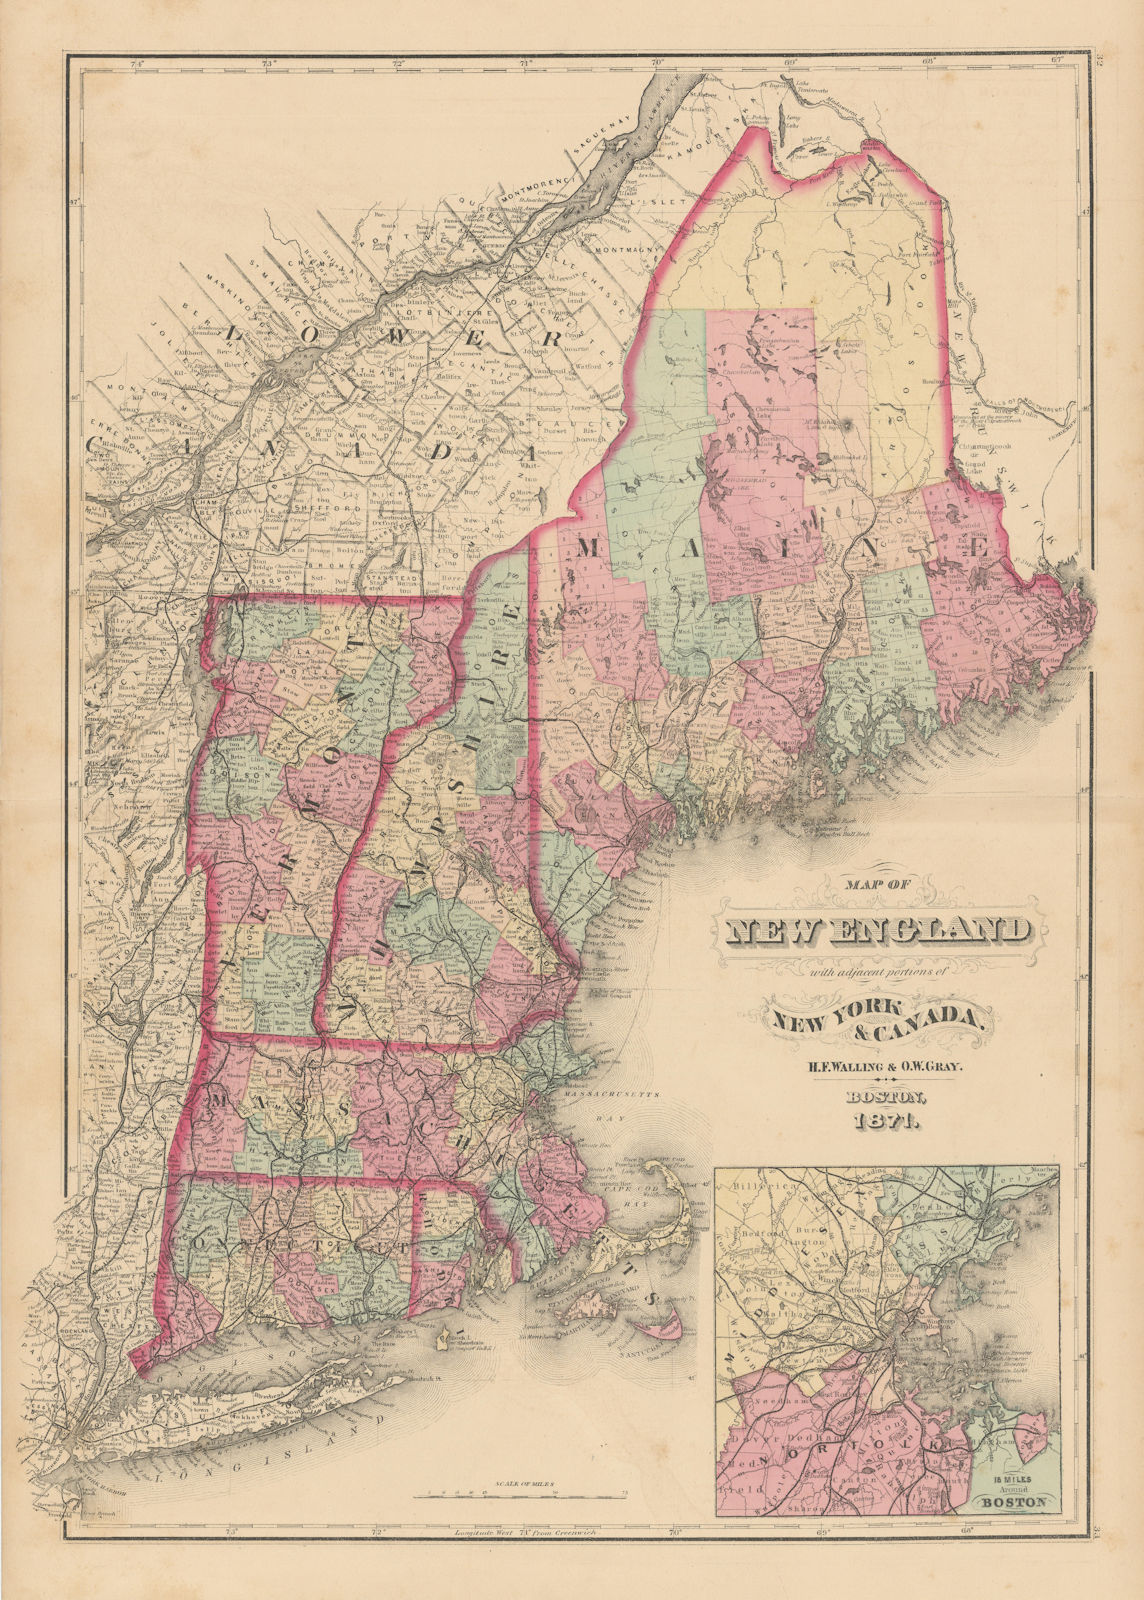 Map of New England with adjacent portions of New York… WALLING & GRAY 1871